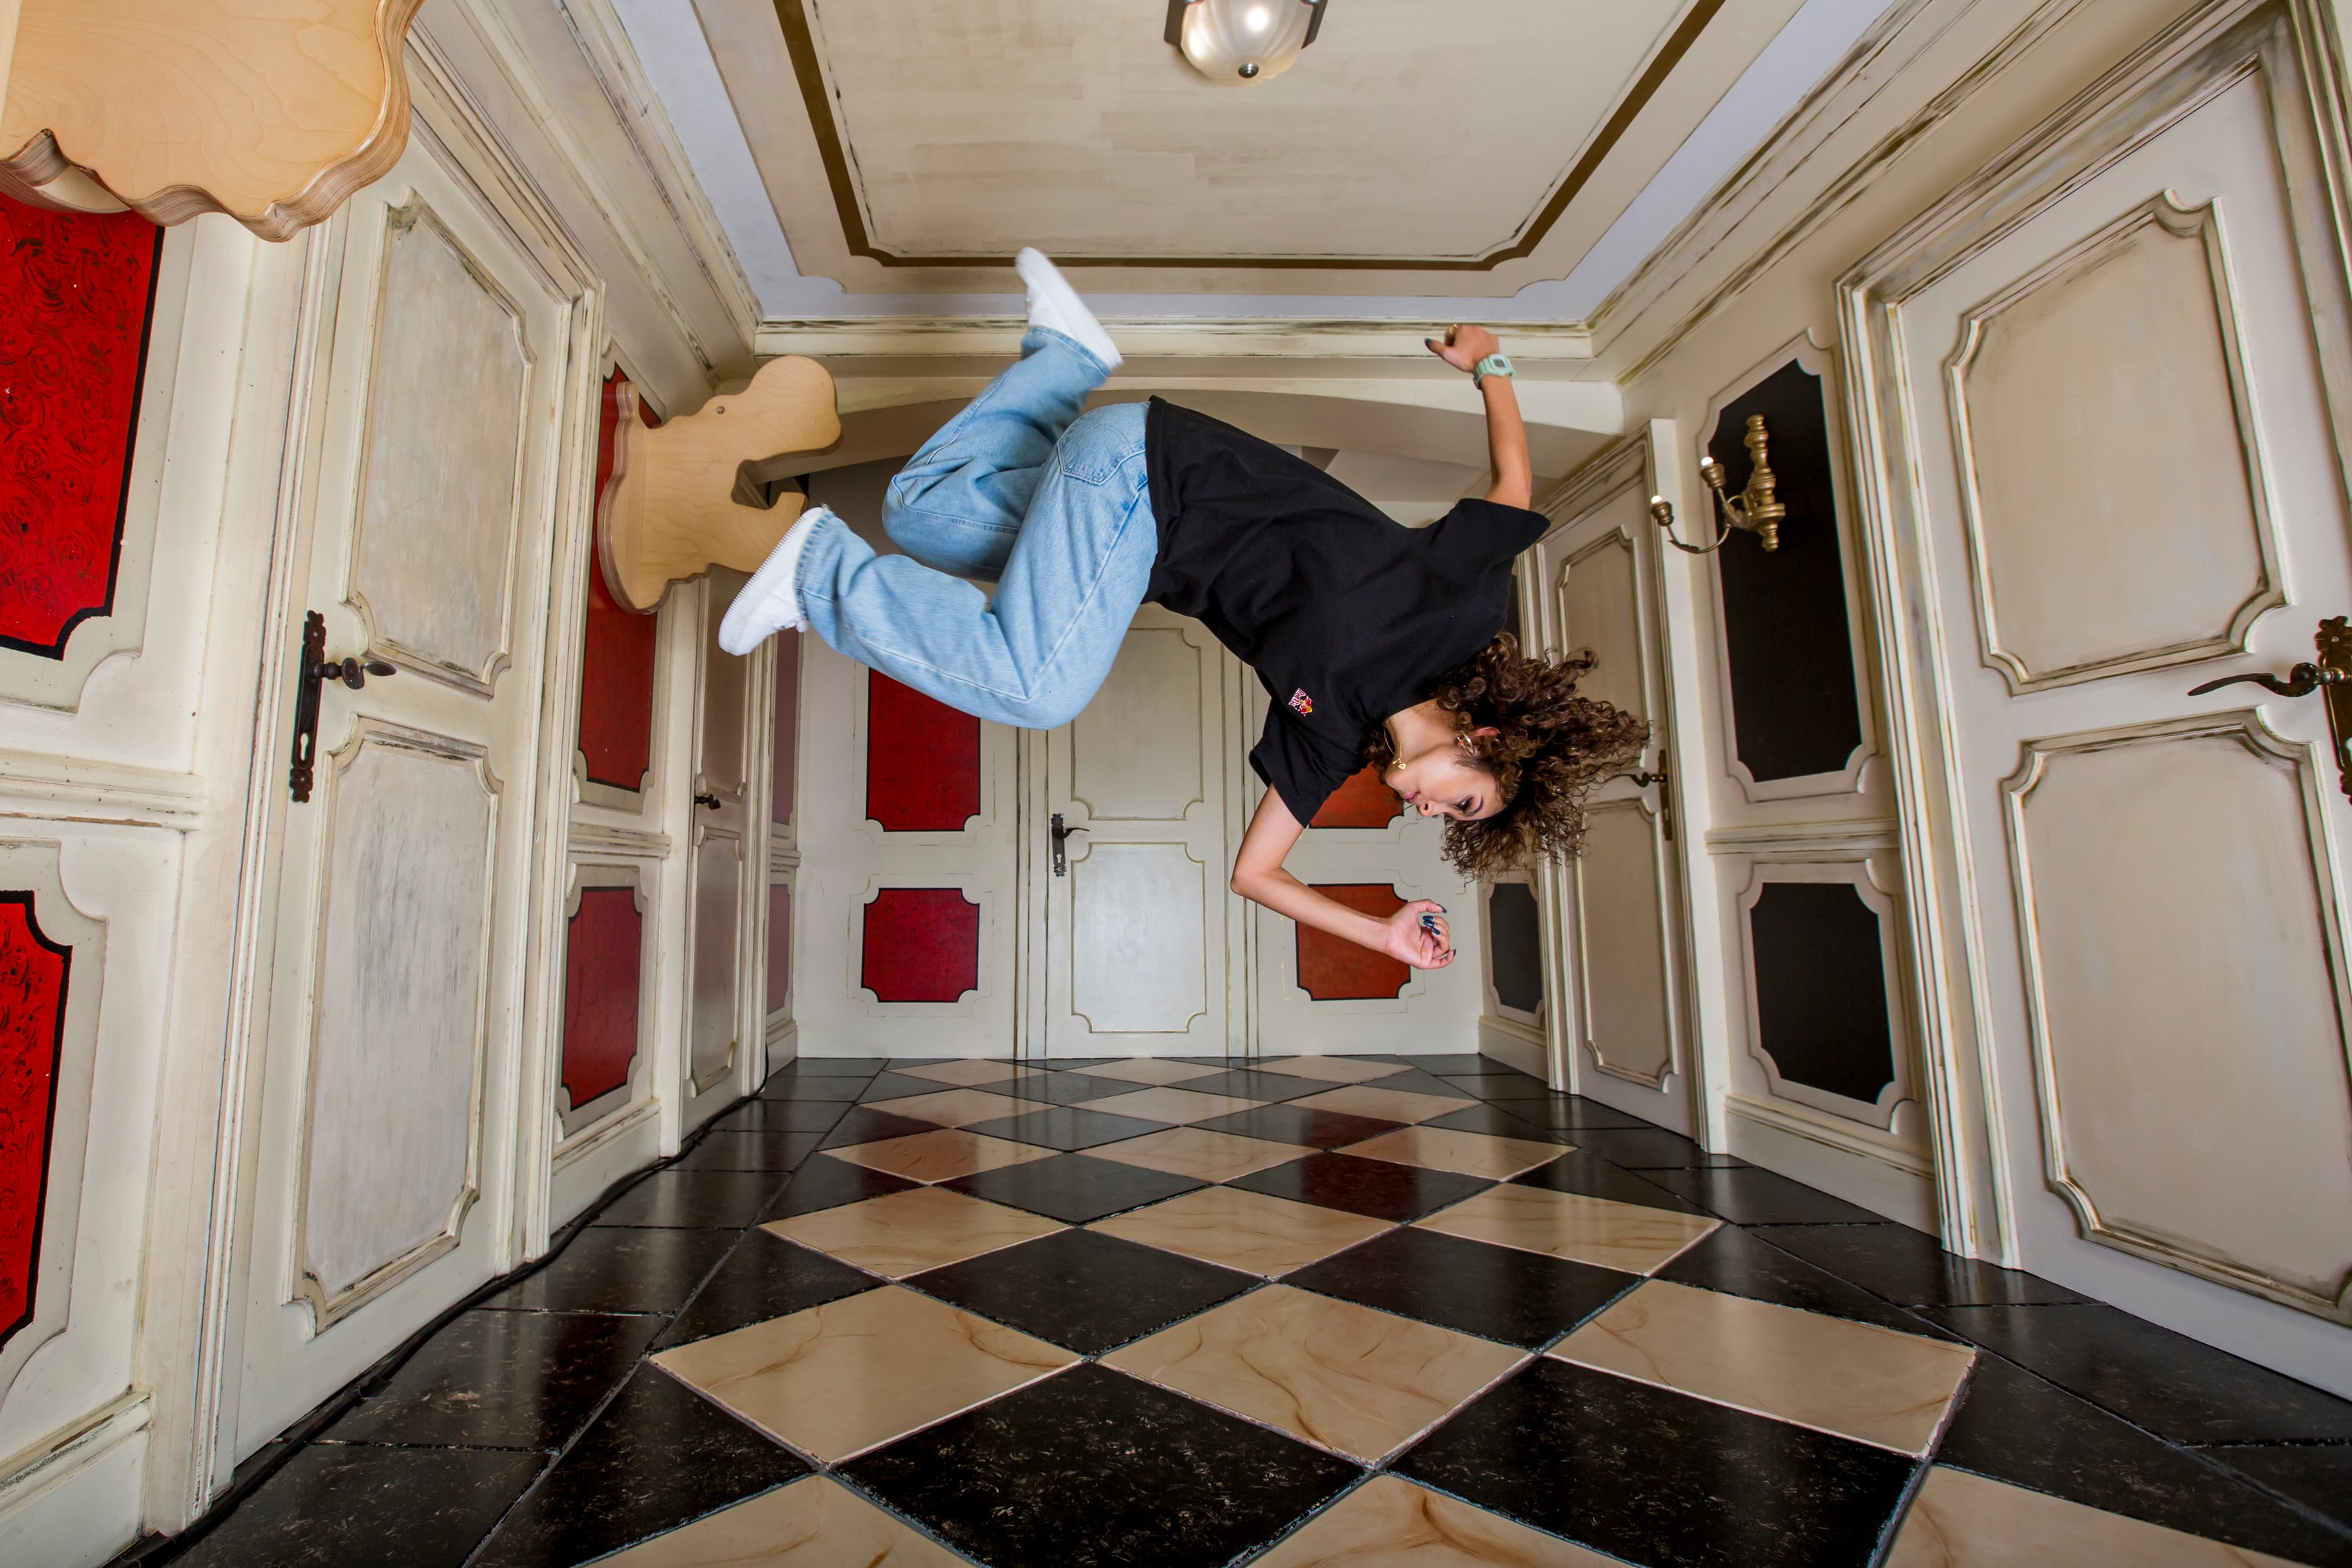 Best Gravity defying images: 5 shots to check out